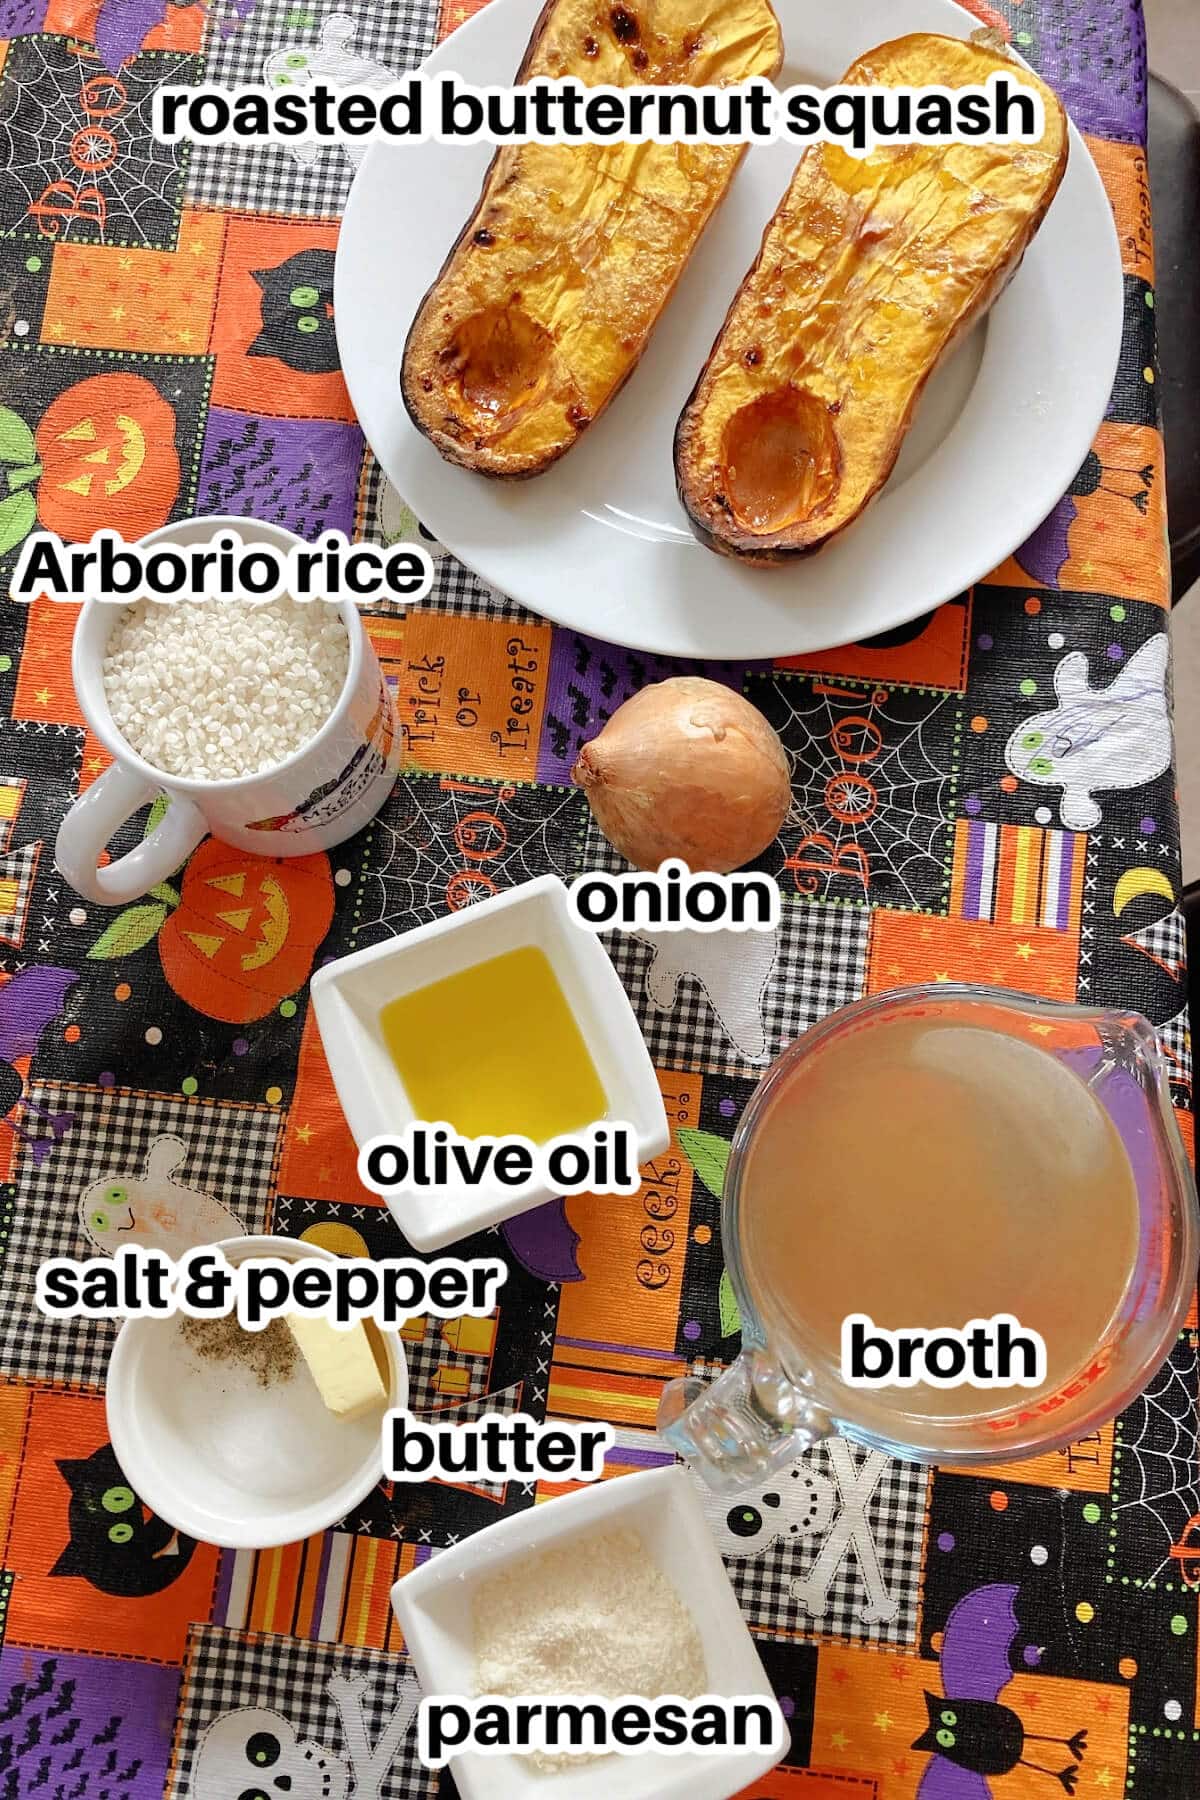 Ingredients needed to make risotto with butternut squash.